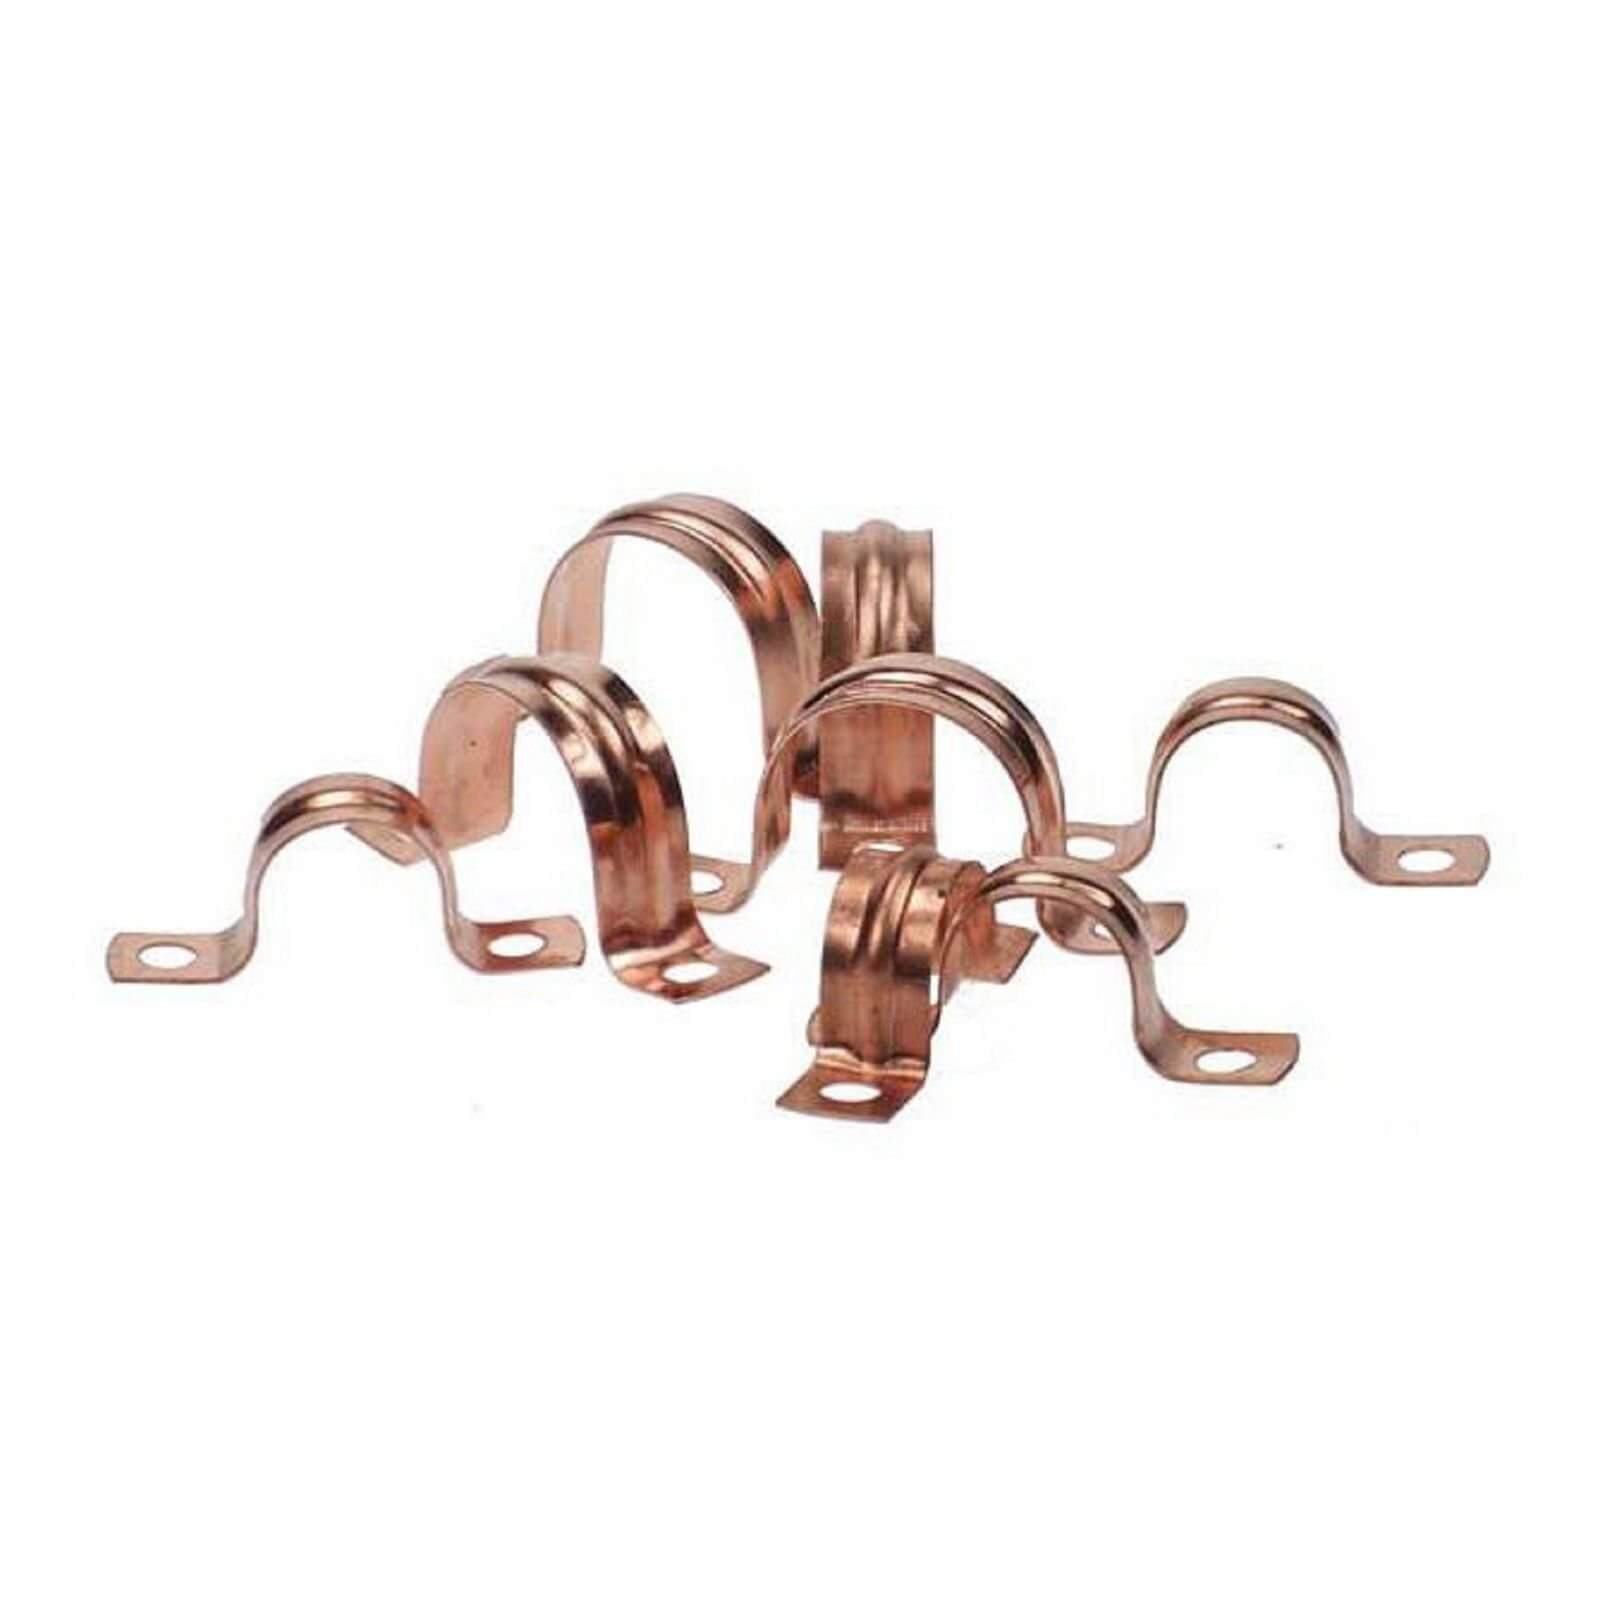 Photo of Saddle Clip - Copper - 15mm - 10 Pack